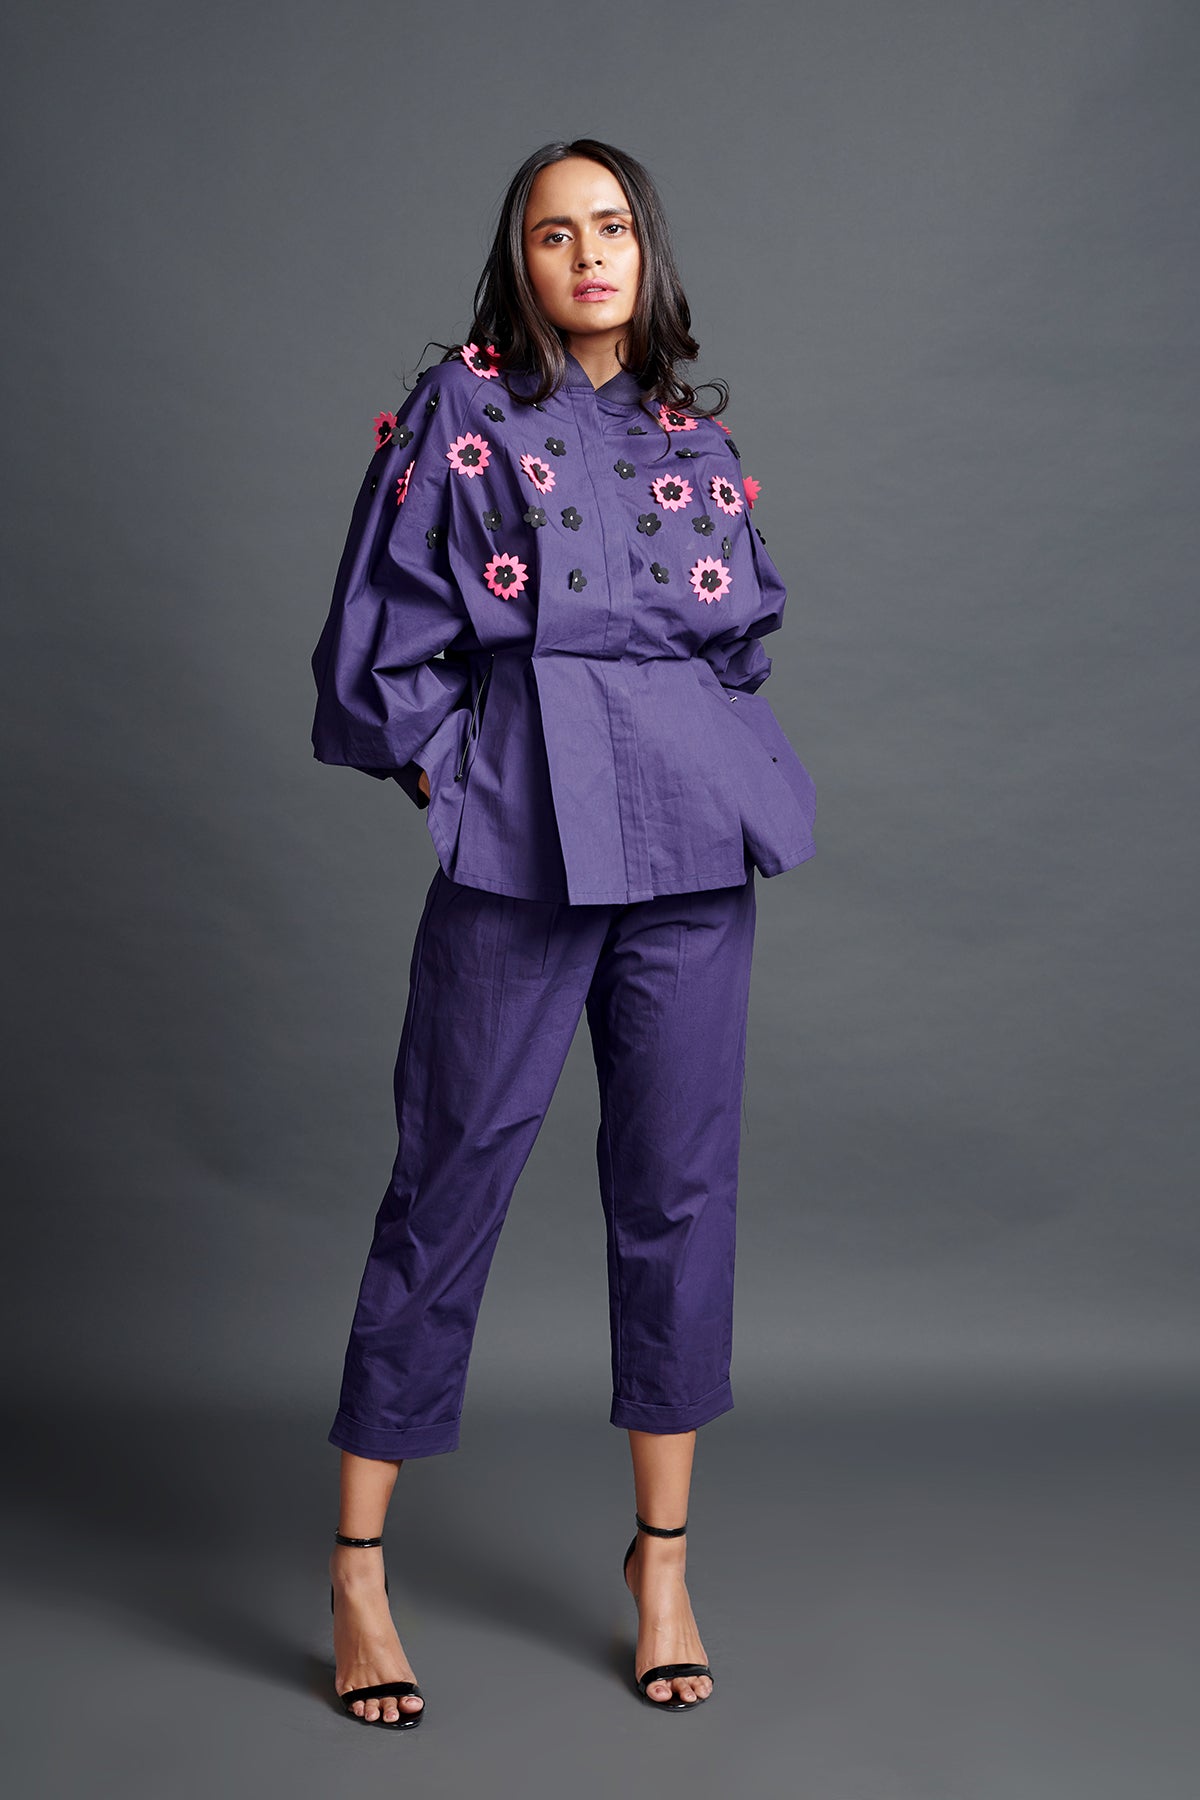 Image of PURPLE SHIRT IN COTTON BASE WITH PLEATED CONFETTI DETAIL. IT IS PAIRED WITH MATCHING PANTS. From savoirfashions.com